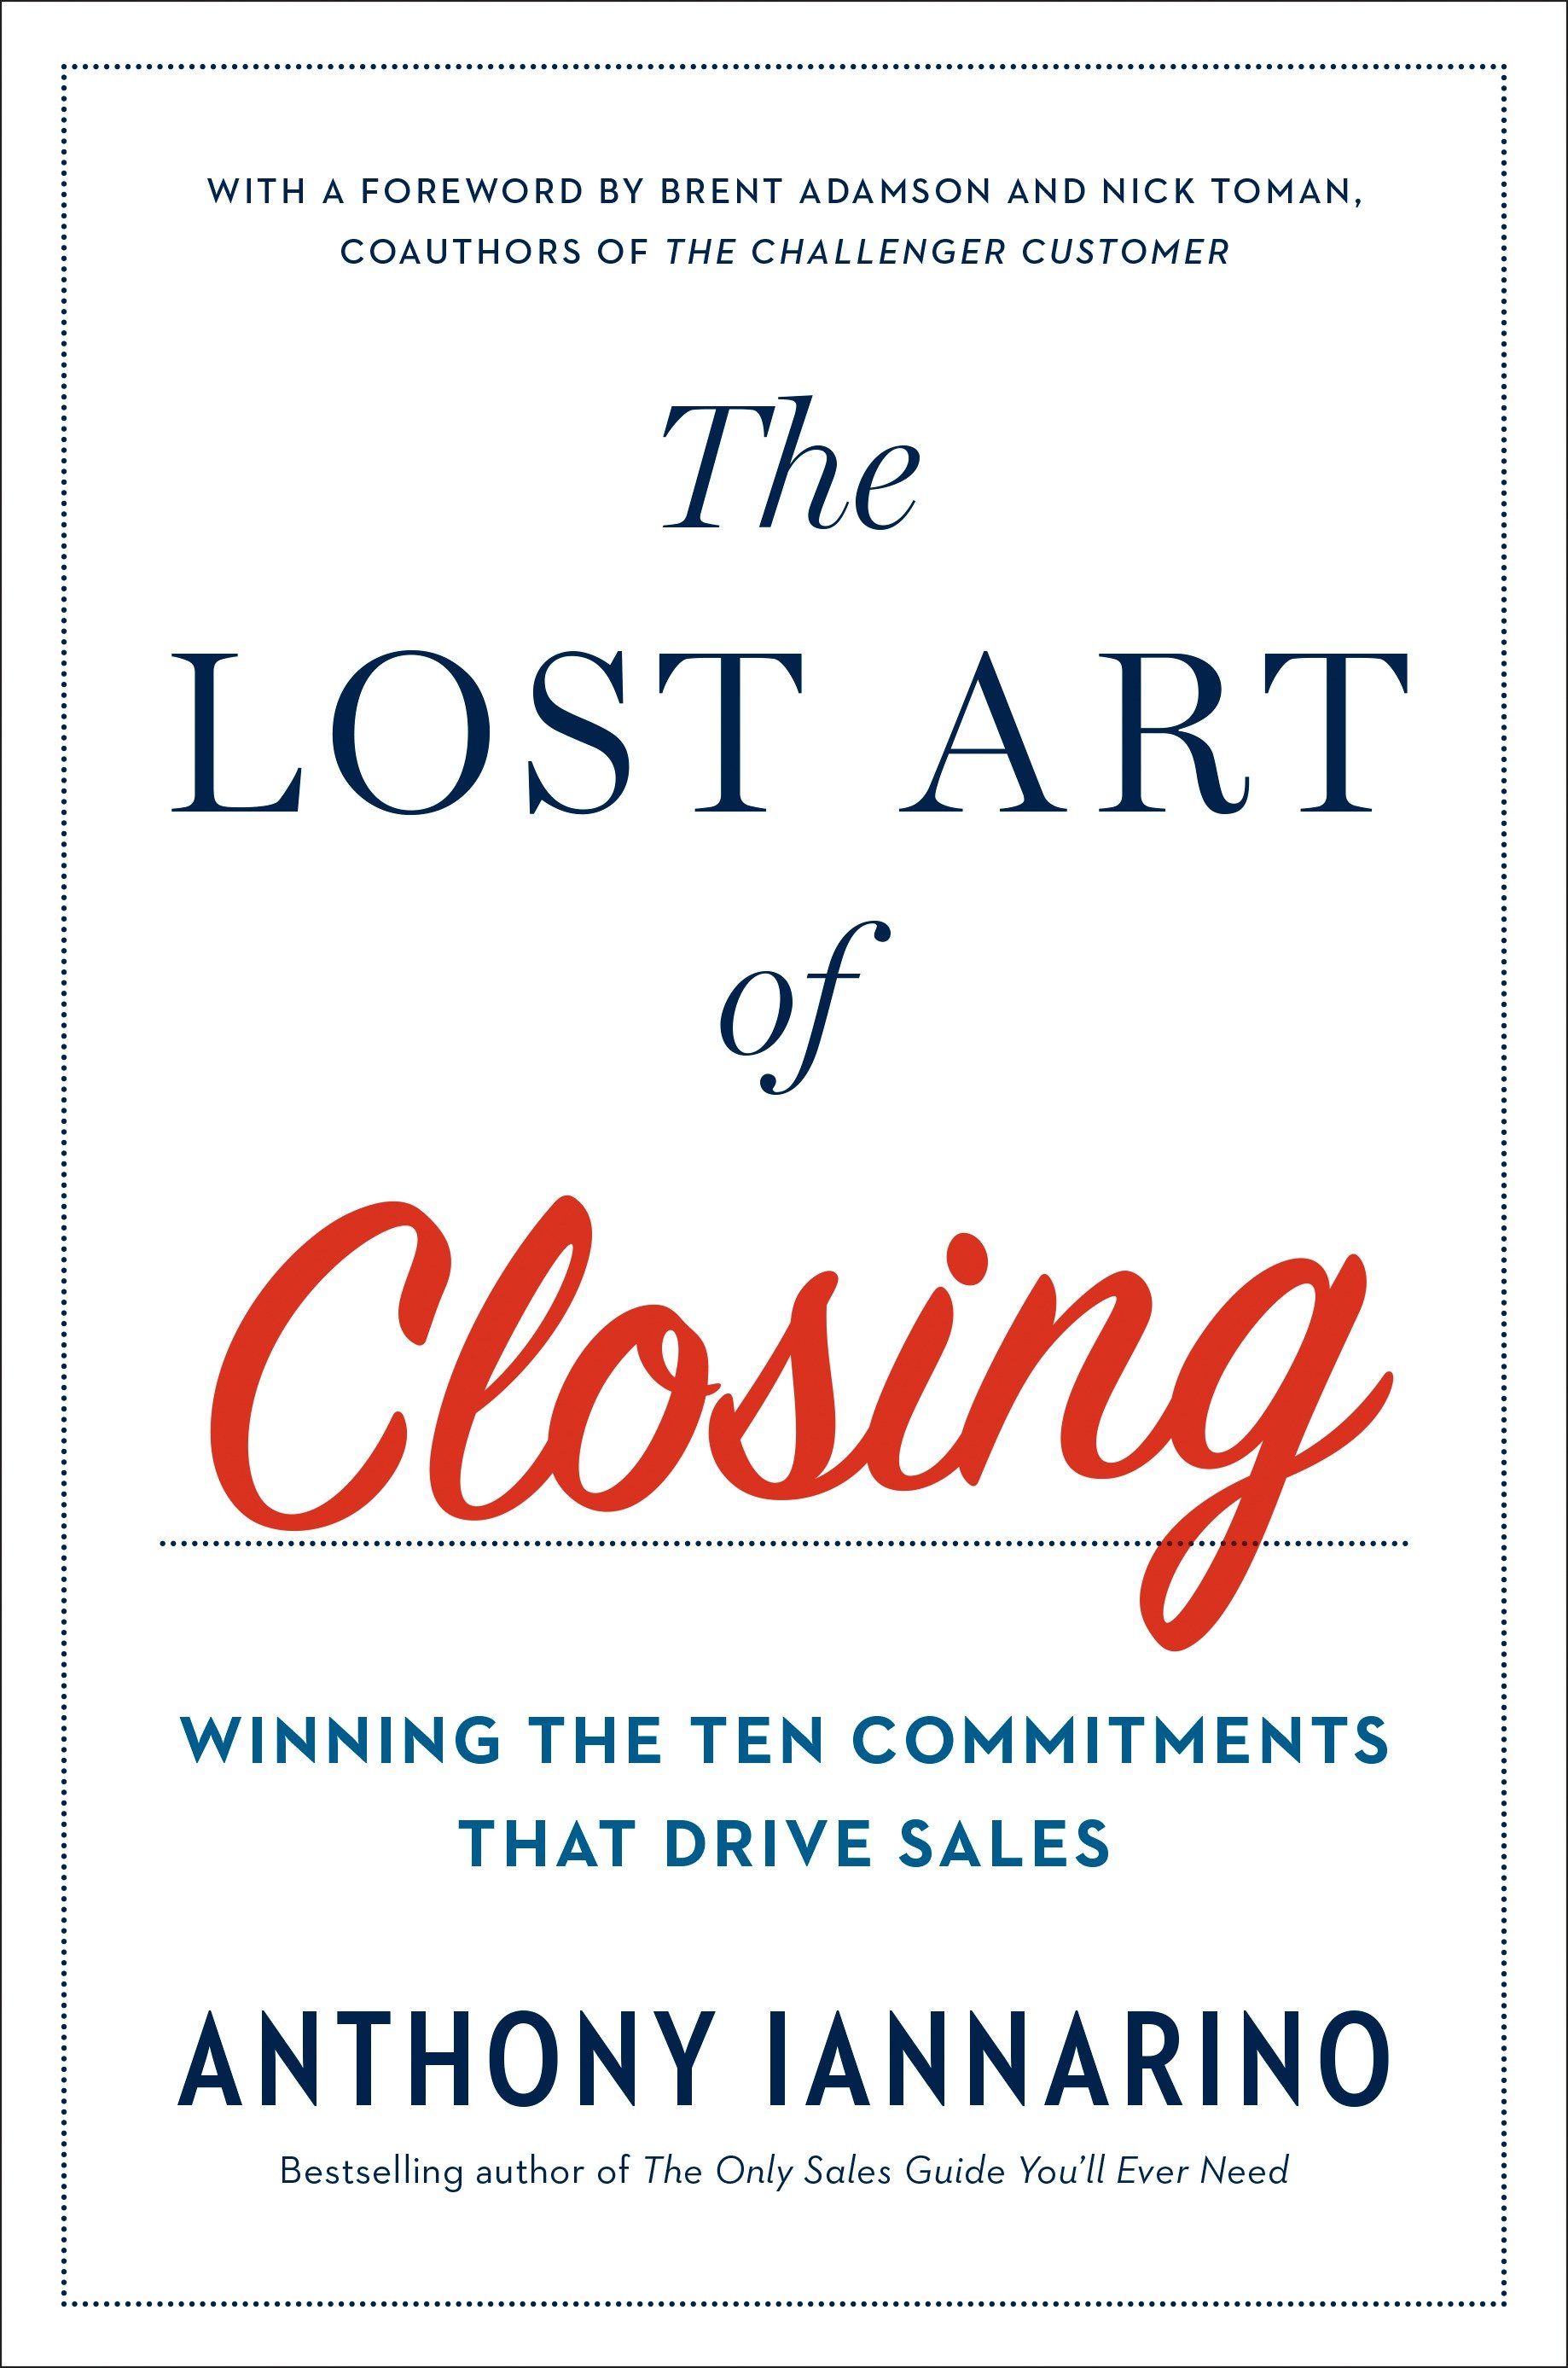 The Lost Art Of Closing (Hardcover Book)